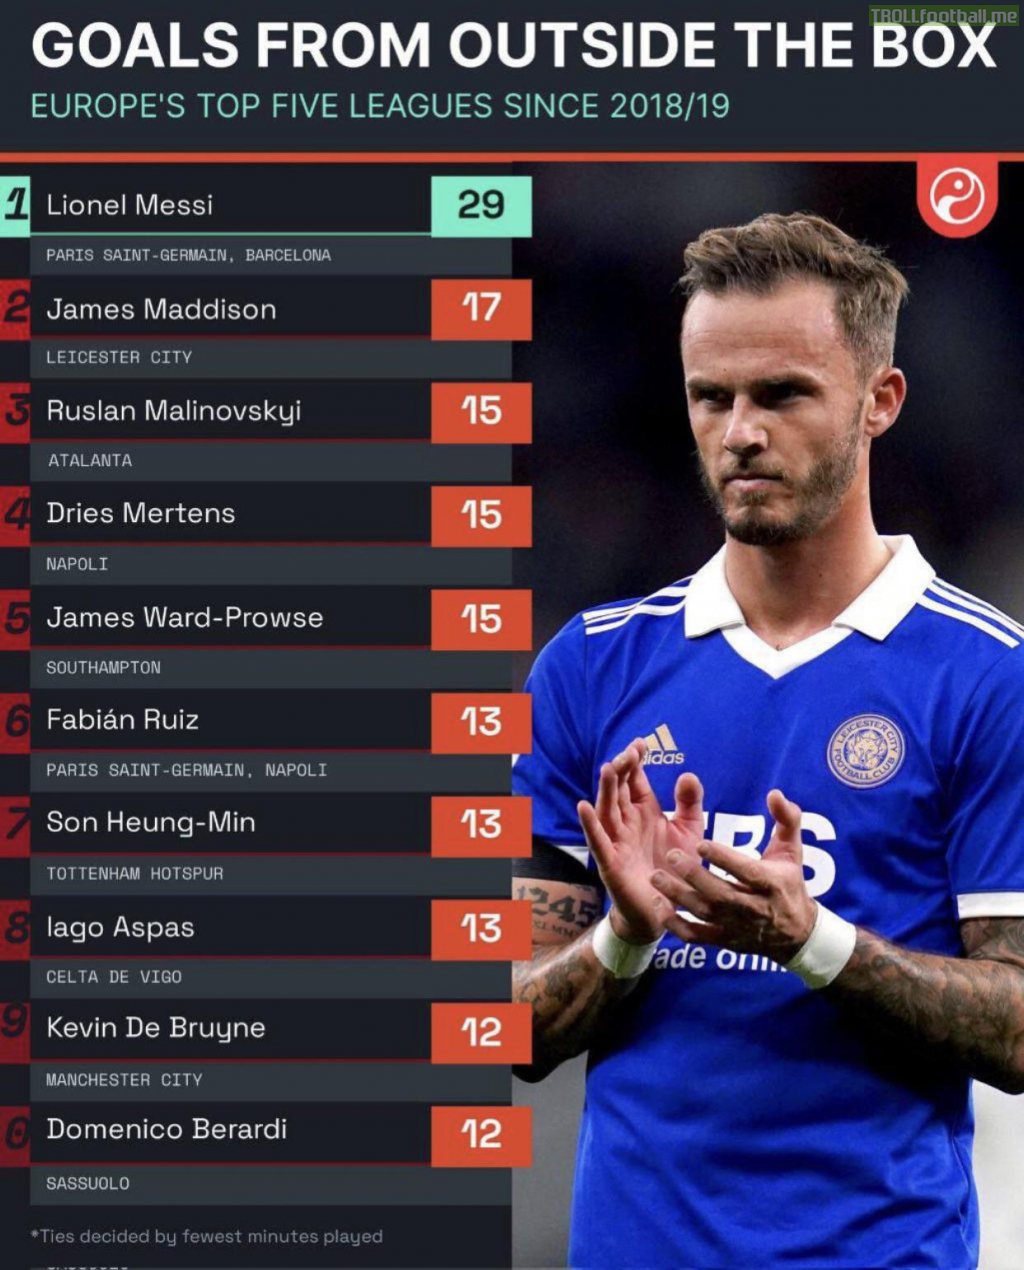 Most goals from outside the box in Europe’s top 5 Leagues since 2018/19